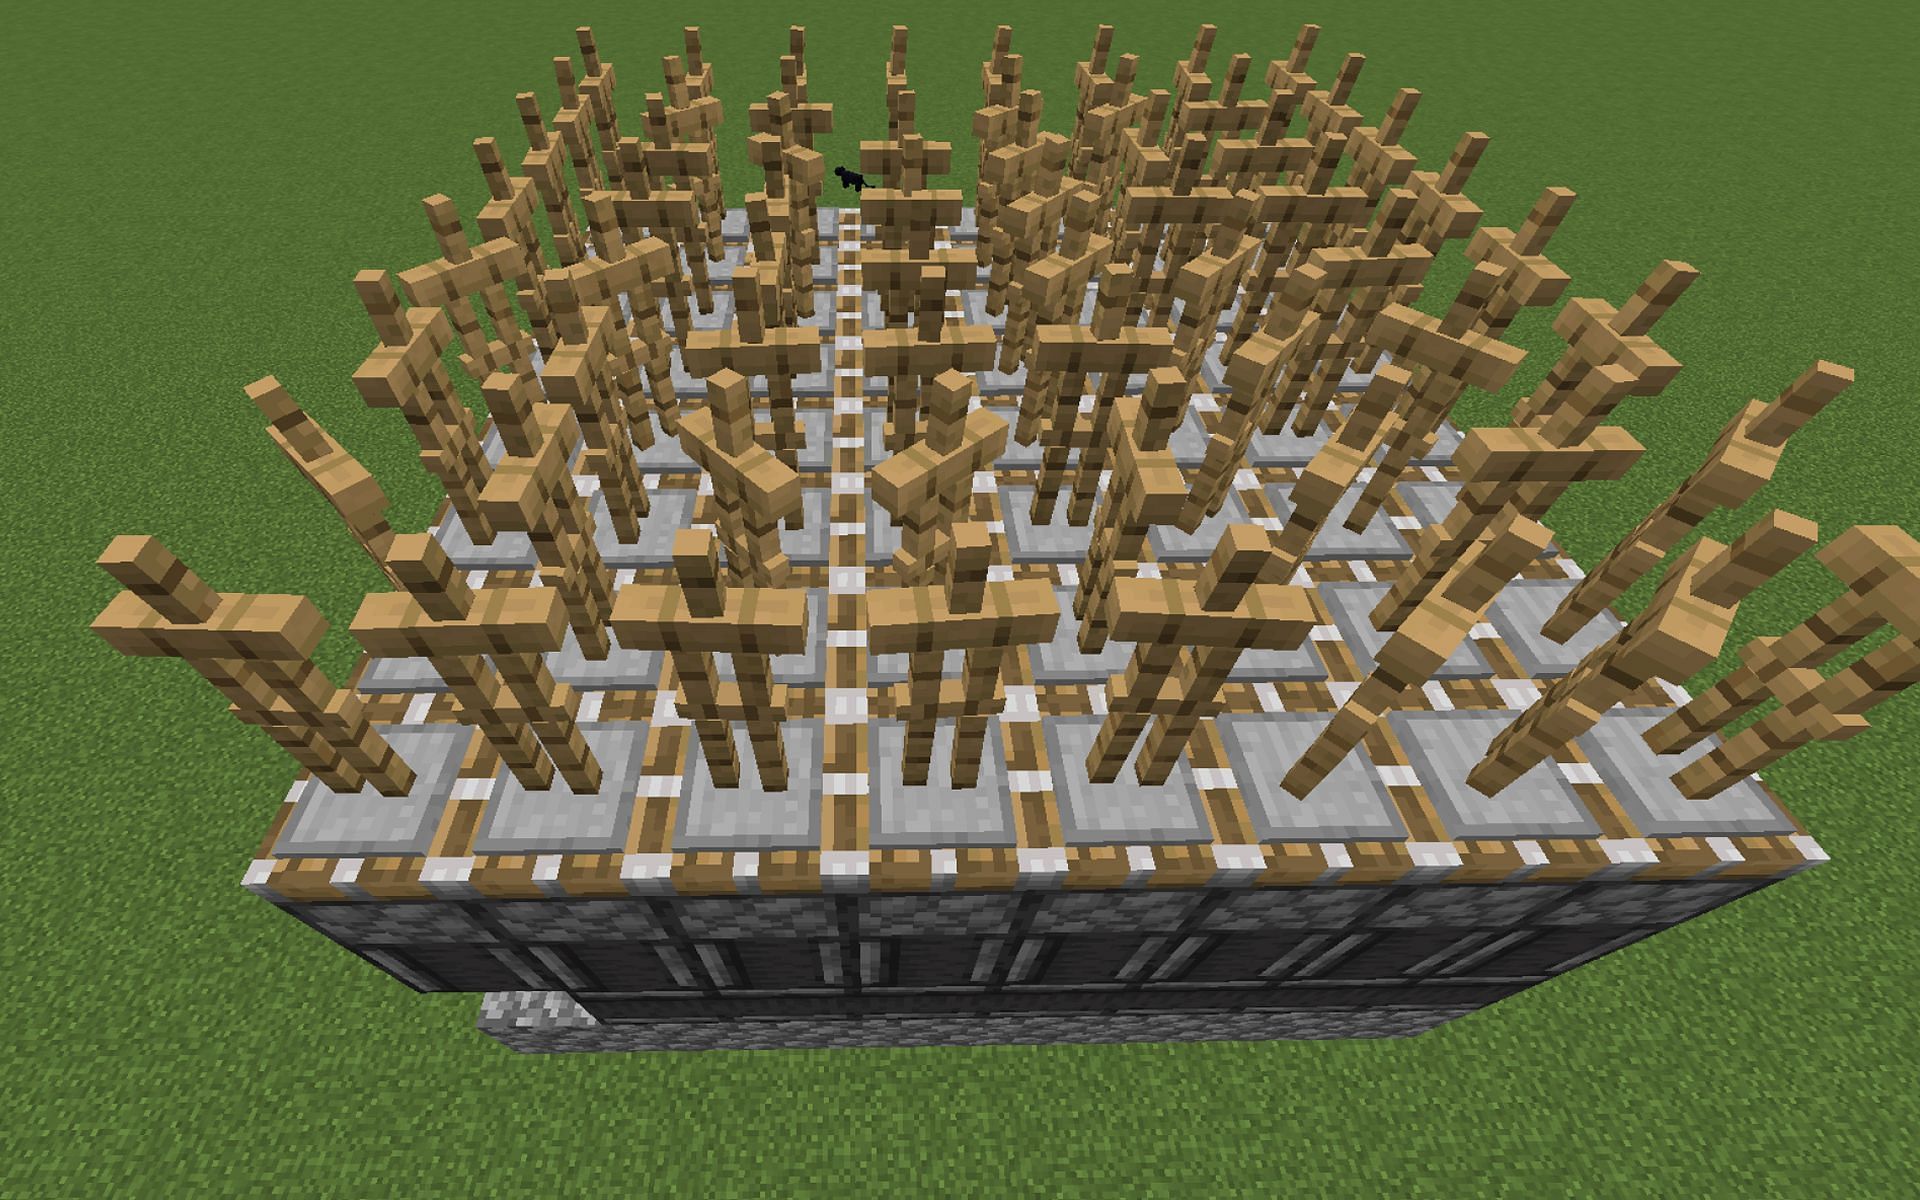 Armor stands are optional for this lag machine. Image via Minecraft.